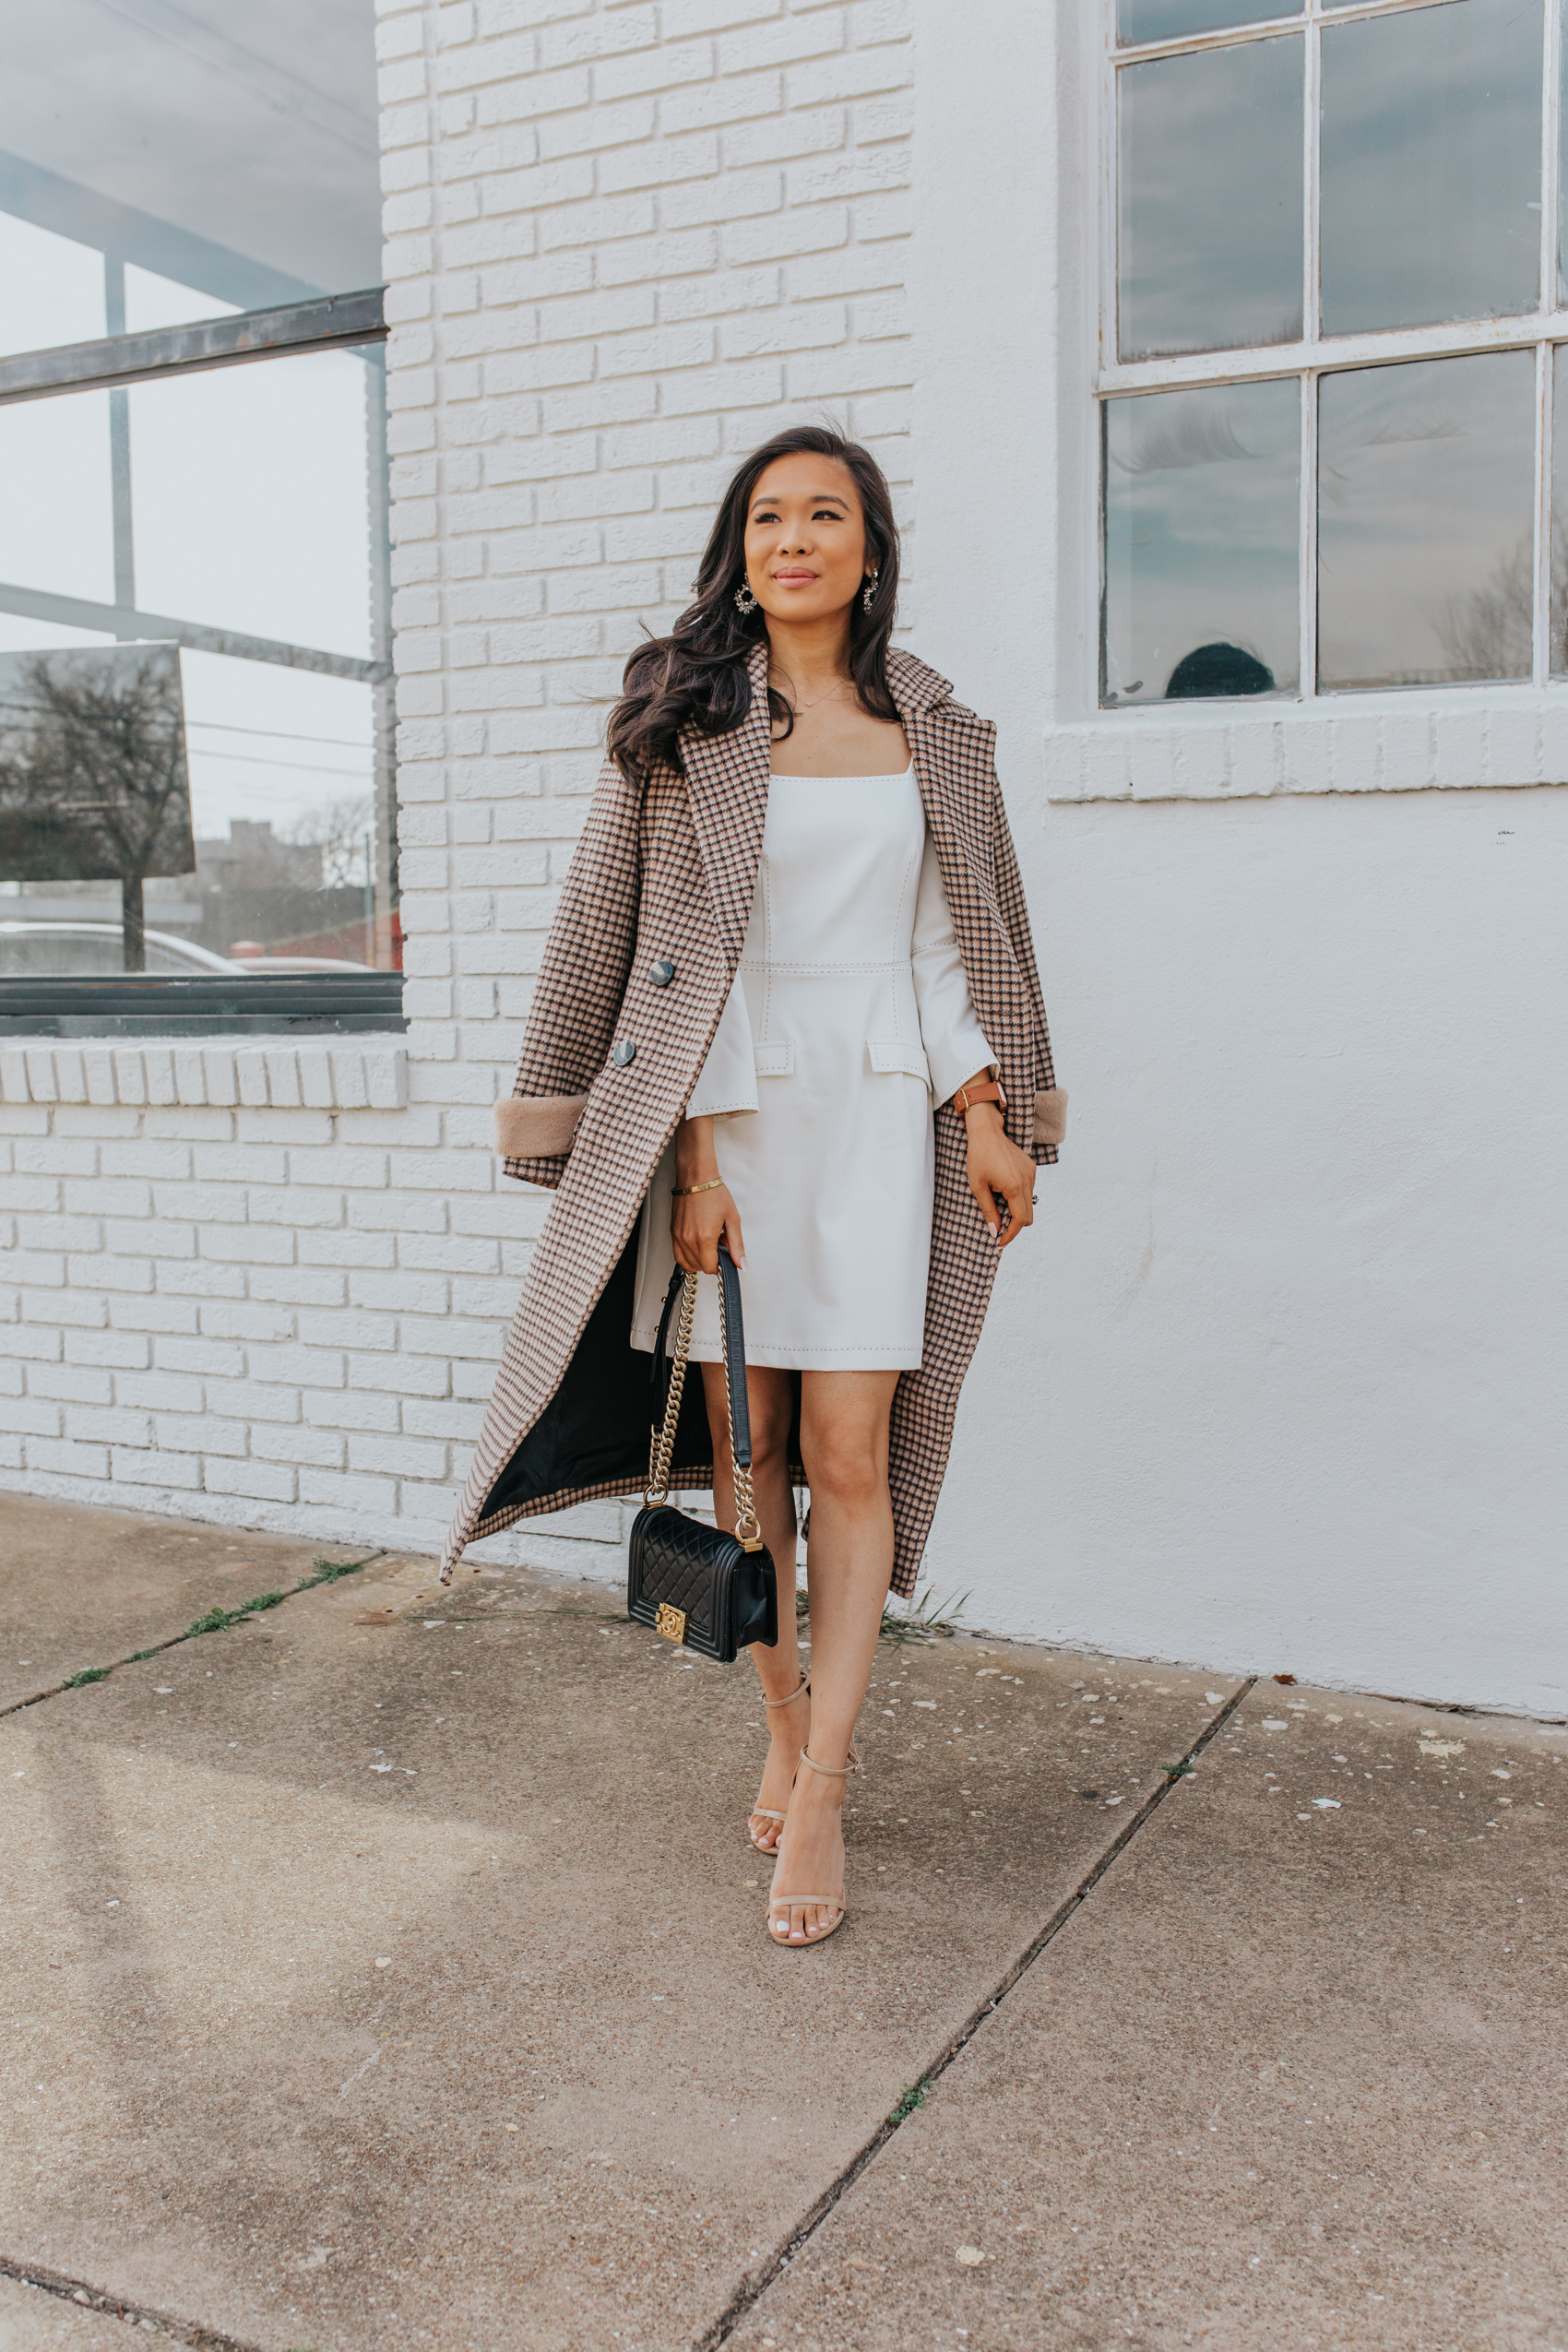 Blogger Hoang-Kim shares a winter bridal shower look with a plaid coat, white long-sleeve dress, Stuart Weitzman nudist sandals, Chanel Boy Bag and olive + piper earrings